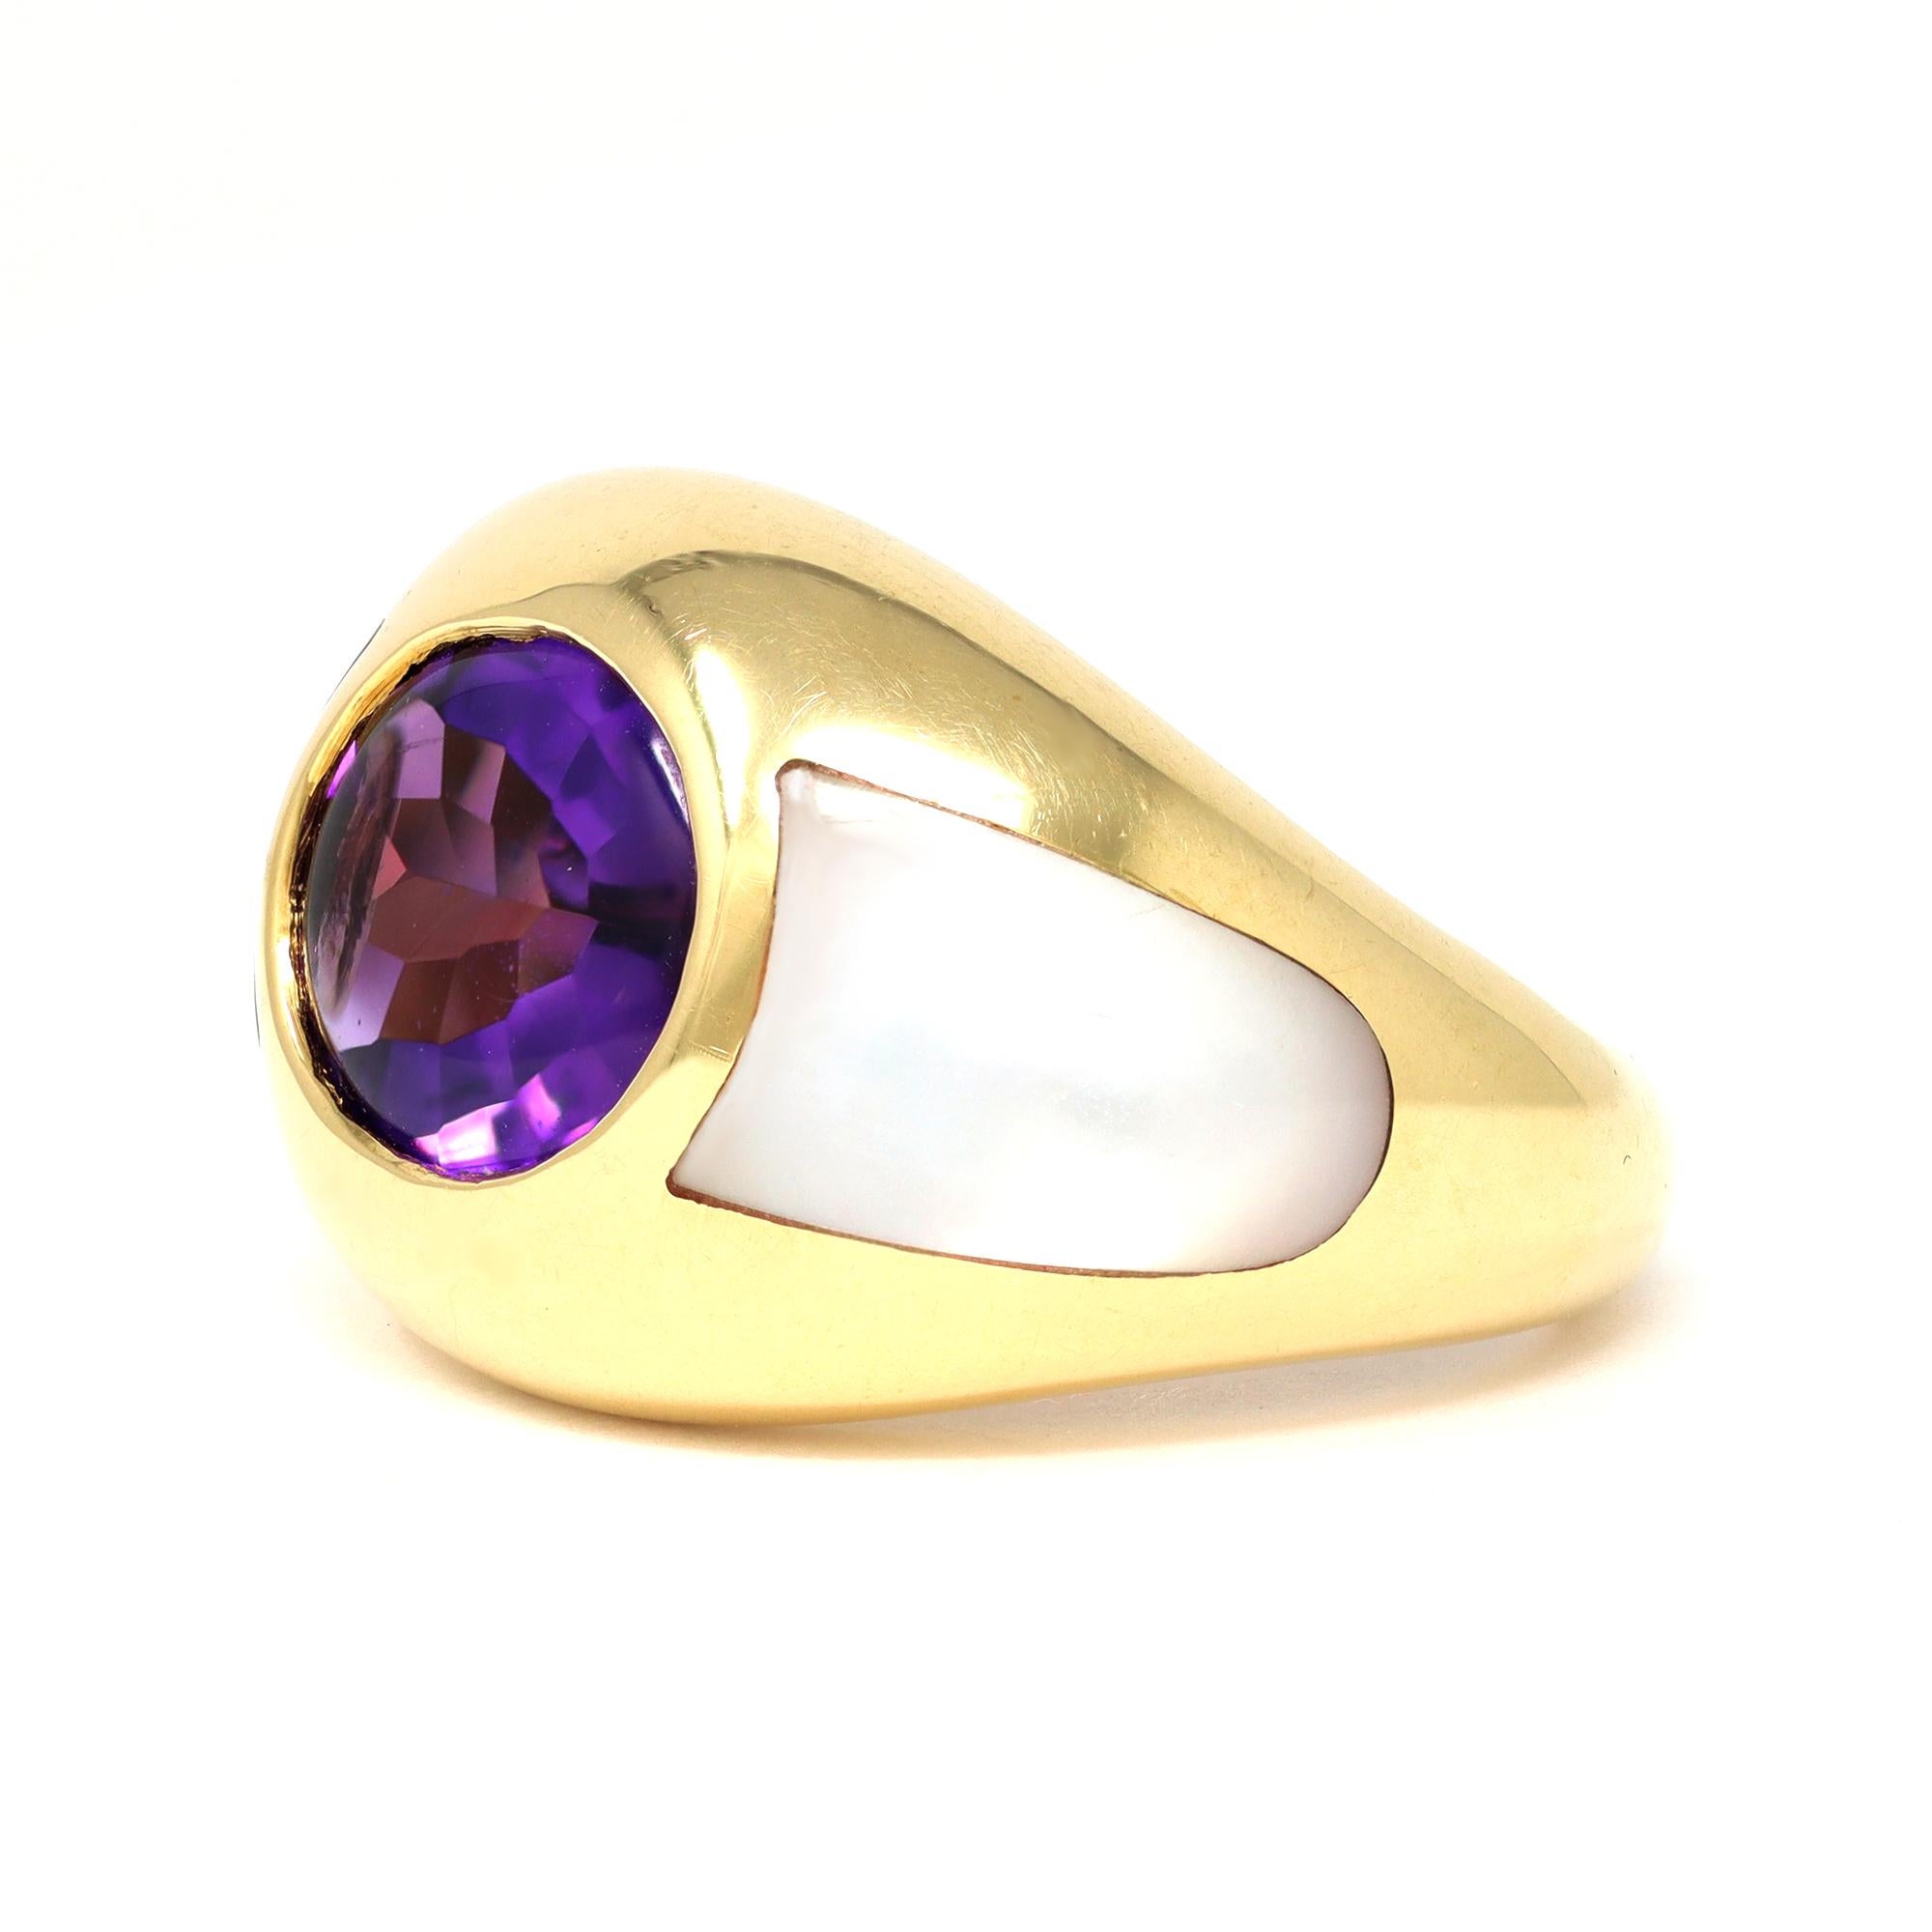 An 18 karat yellow gold, amethyst and mother-of-pearl ring by the famous French house of high end jewelry Mauboussin Paris. The bezel set Amethyst weighs approximately 2.20 carats. It is flanked by polished mother of pearl especially cut to fit each